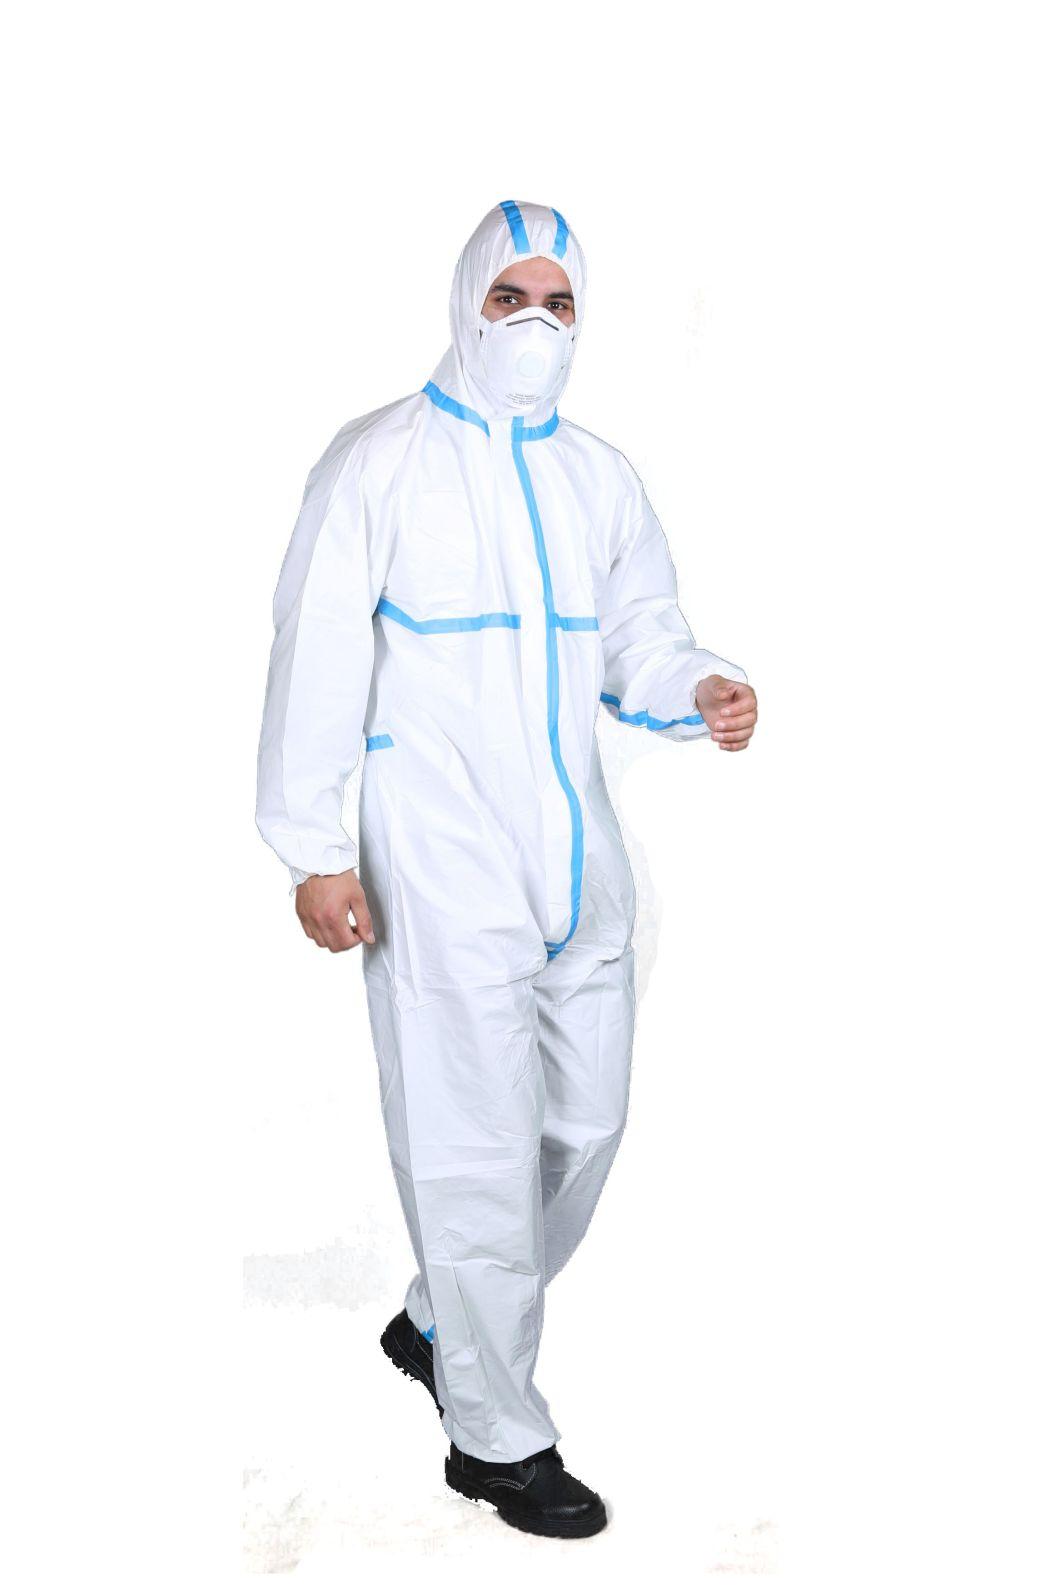 Industry Safety Waterproof Workwear Chemical Protective Clothing Type 5&6 White Microporous Suit Disposable Coveralls for Men